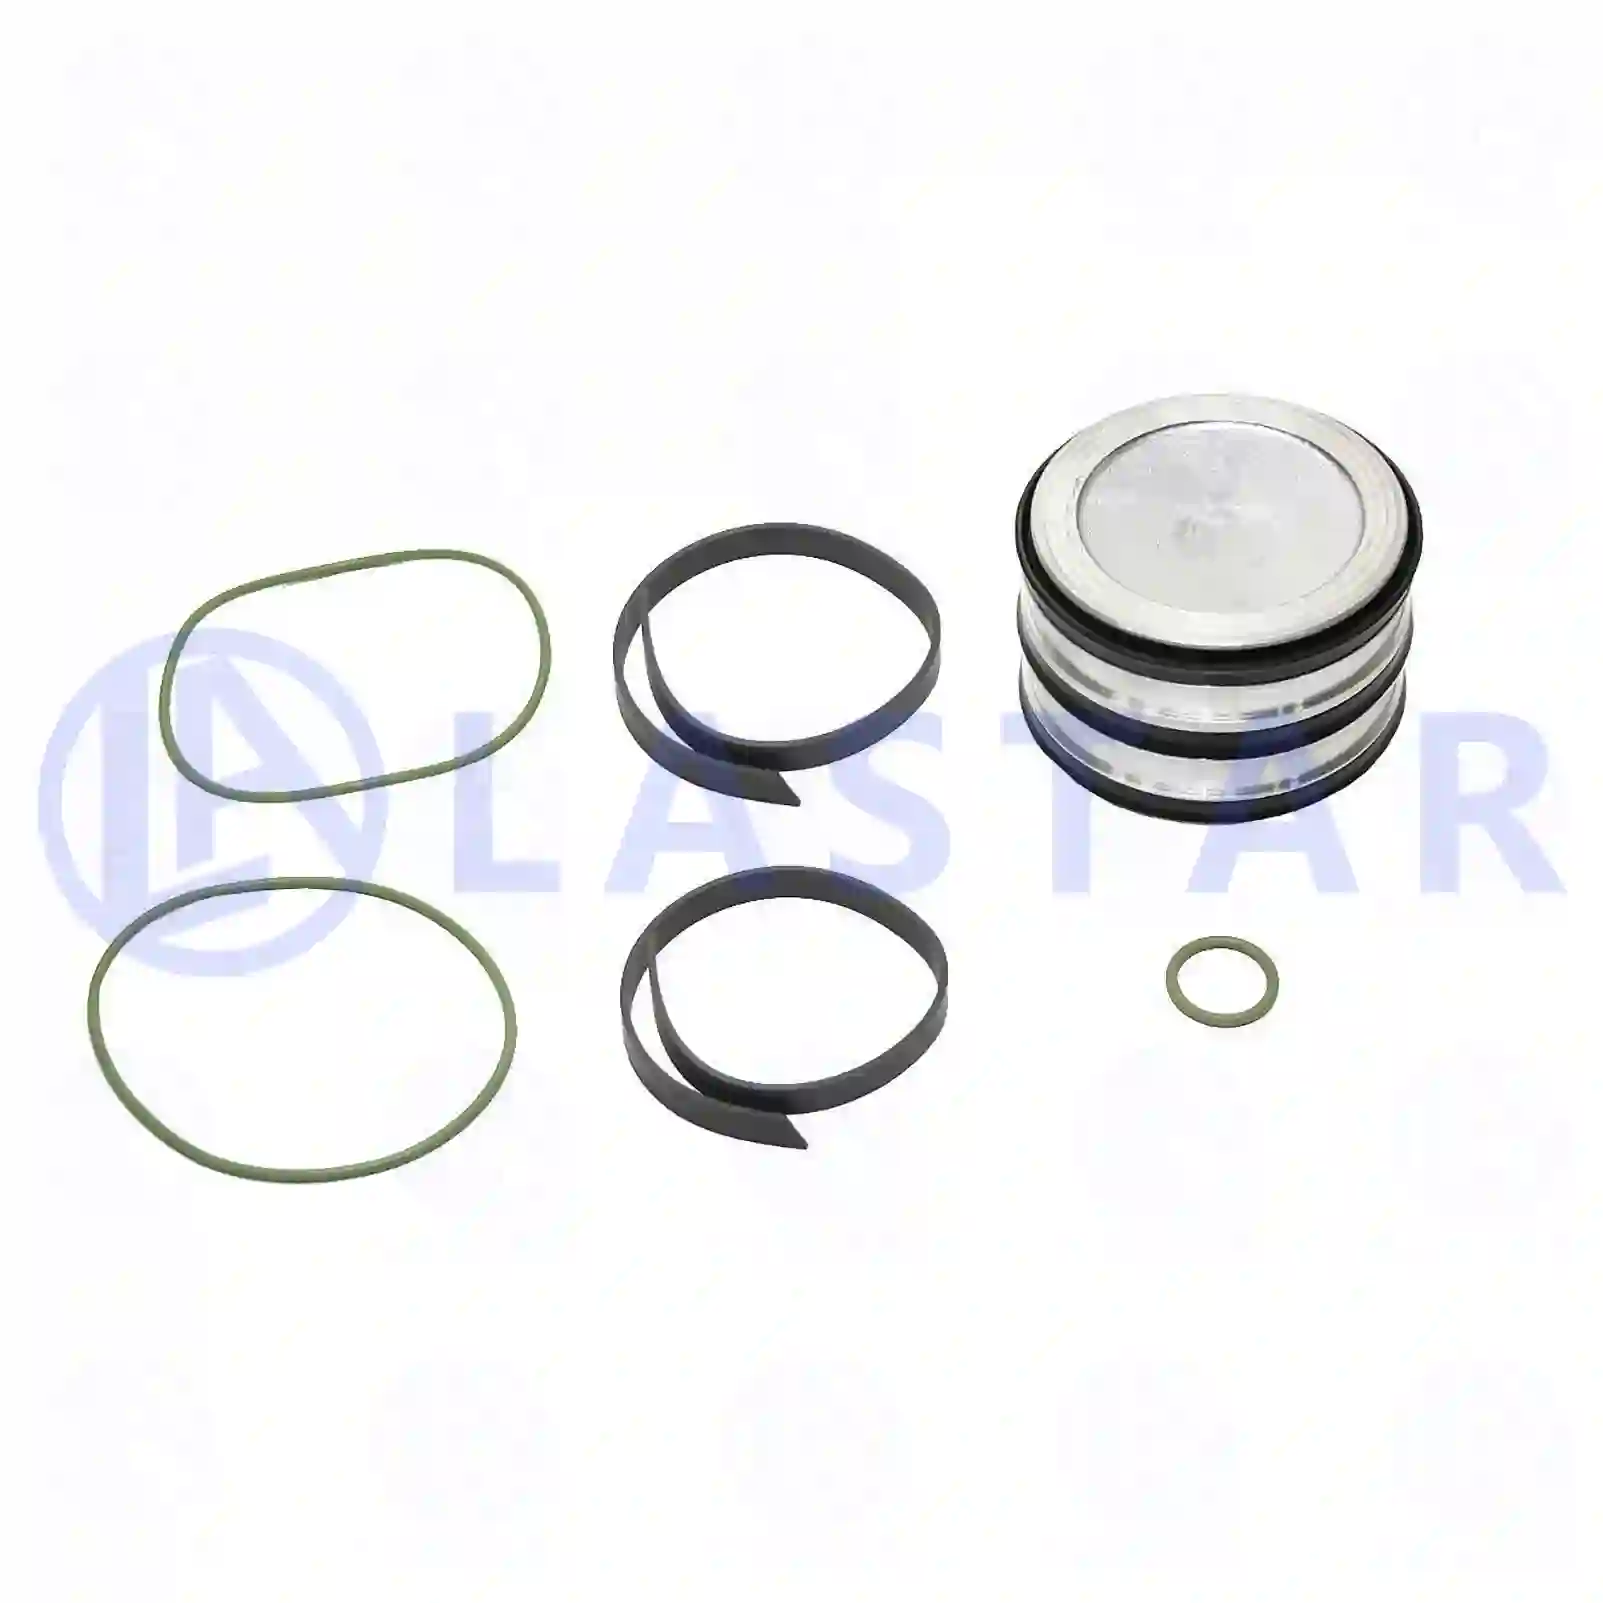 Repair kit, with piston - for accumulator, 77733261, 1394840, 550542, 550550 ||  77733261 Lastar Spare Part | Truck Spare Parts, Auotomotive Spare Parts Repair kit, with piston - for accumulator, 77733261, 1394840, 550542, 550550 ||  77733261 Lastar Spare Part | Truck Spare Parts, Auotomotive Spare Parts